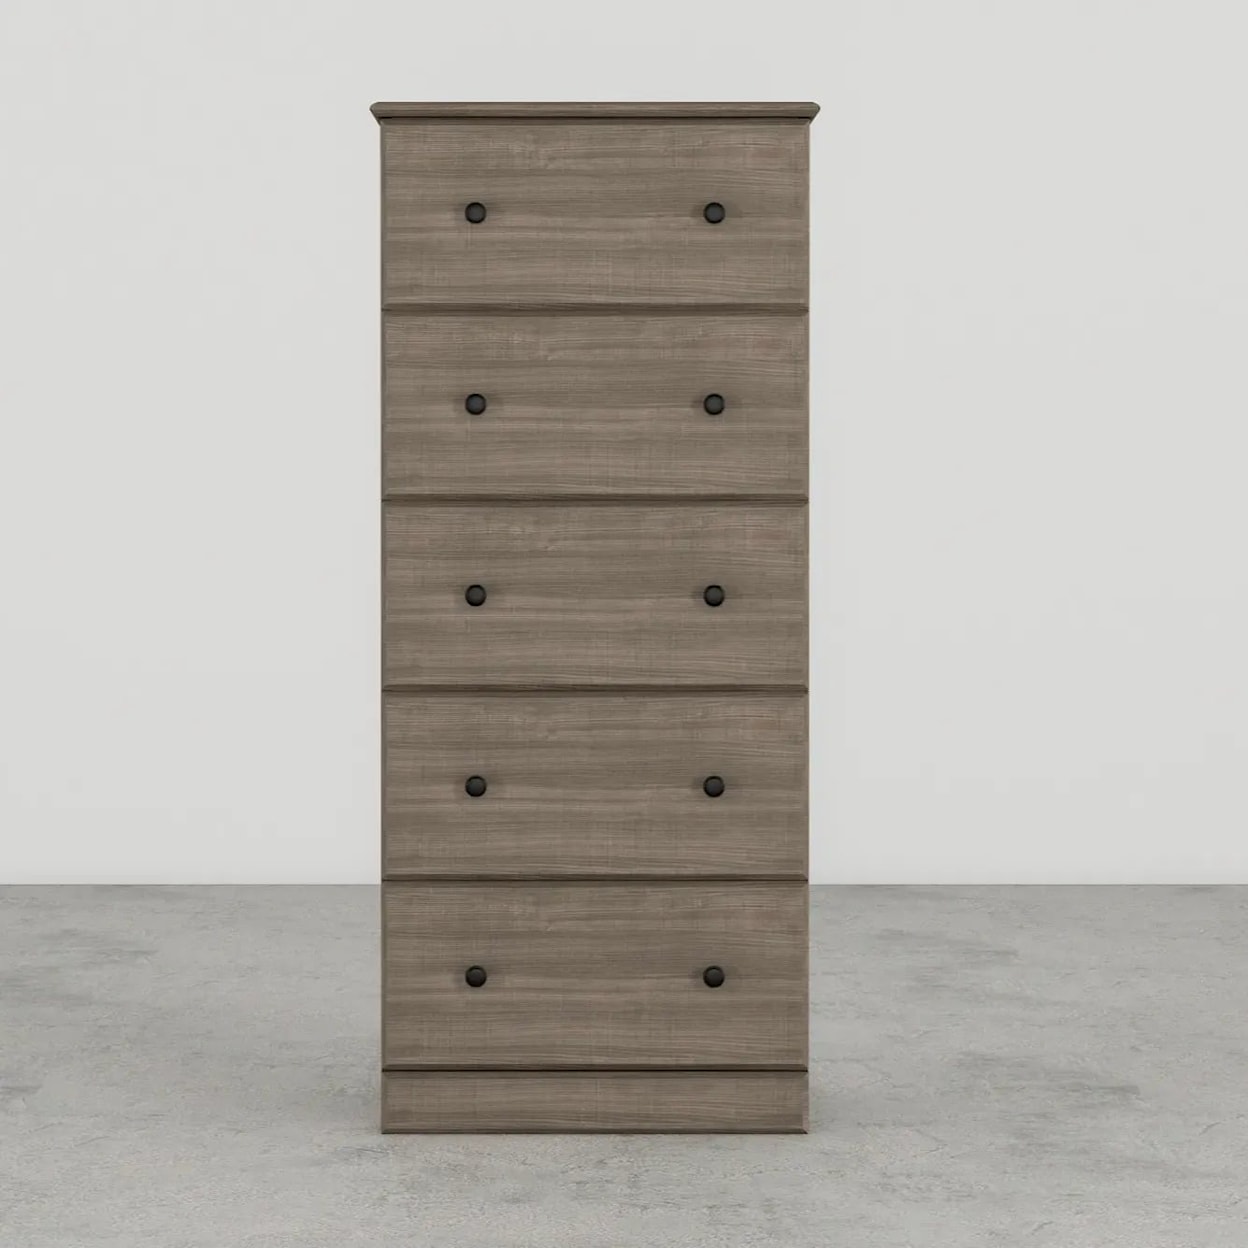 Perdue Dressers/Chests STORM GREY 32" 5 DRAWER CHEST |